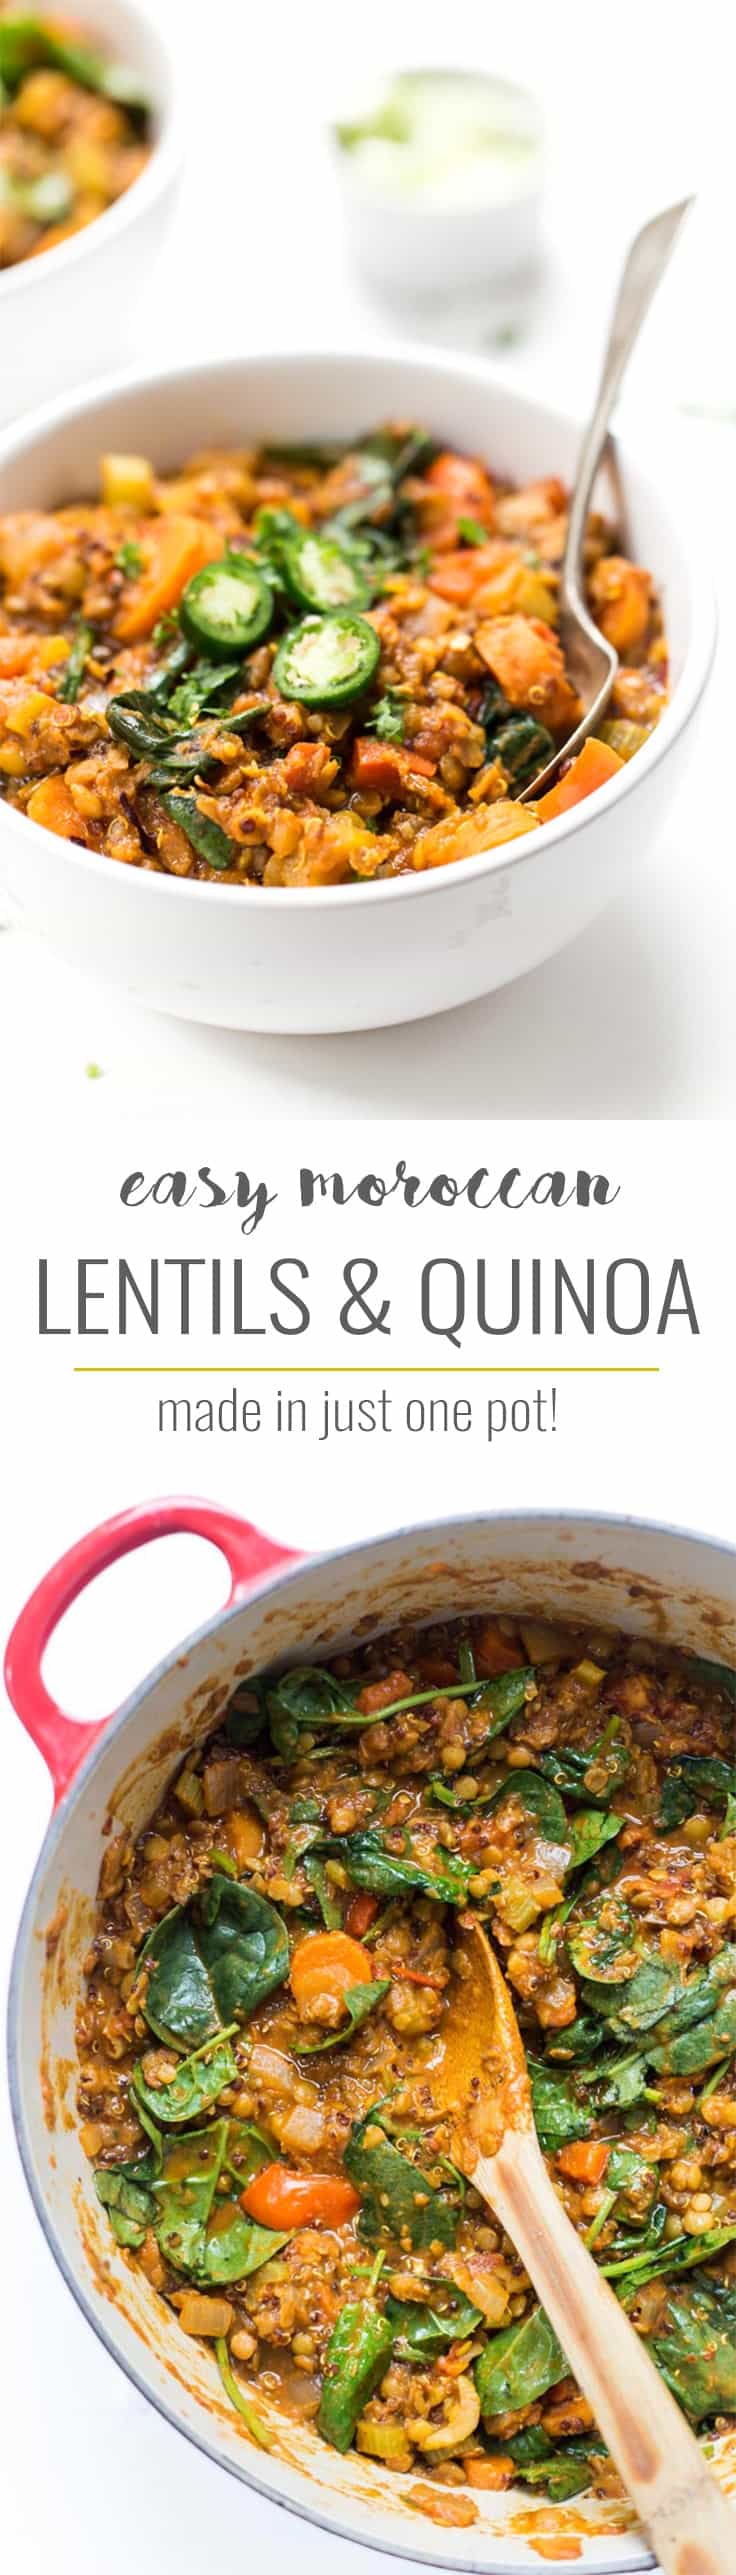 These incredible Moroccan Lentils + Quinoa made in just ONE POT and are a high-protein, absolutely DELICIOUS, plant-based meal your whole family will love!